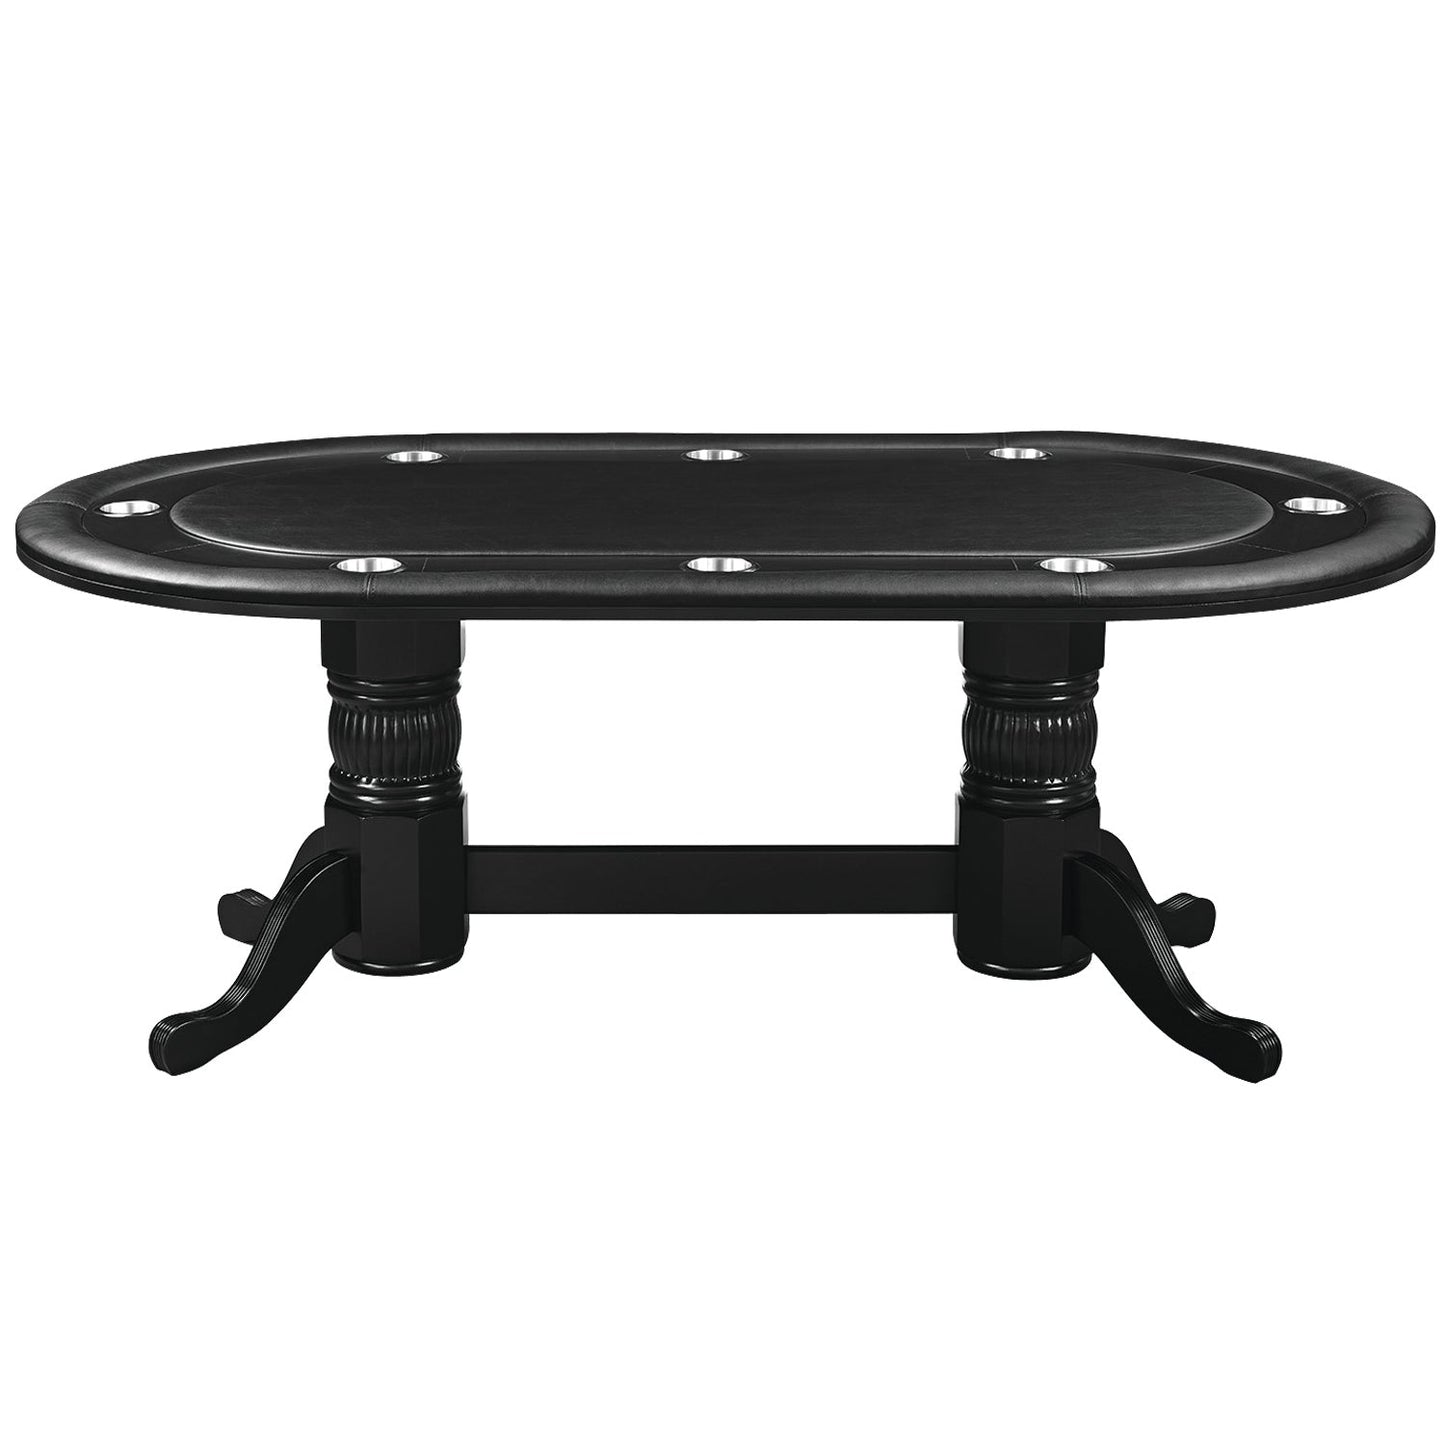 RAM Game Room Game Table 84" - The Bar Design